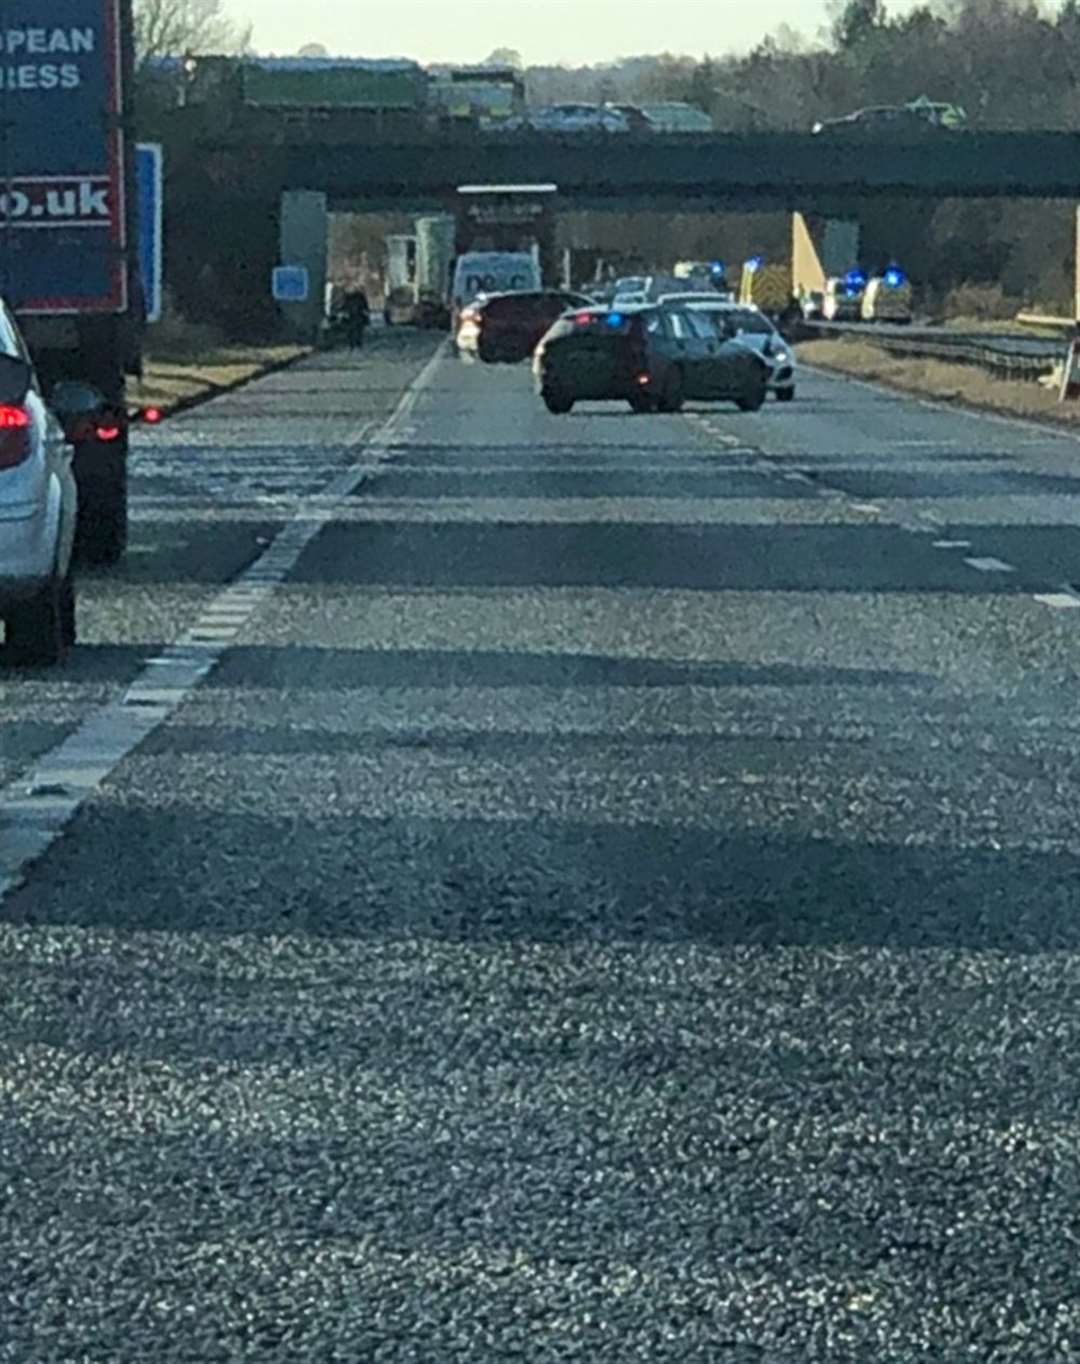 Picture taken with permission from the Twitter feed of Lee Cowan of the scene at Bowburn interchange on the A1(M) (Lee Cowan/PA)